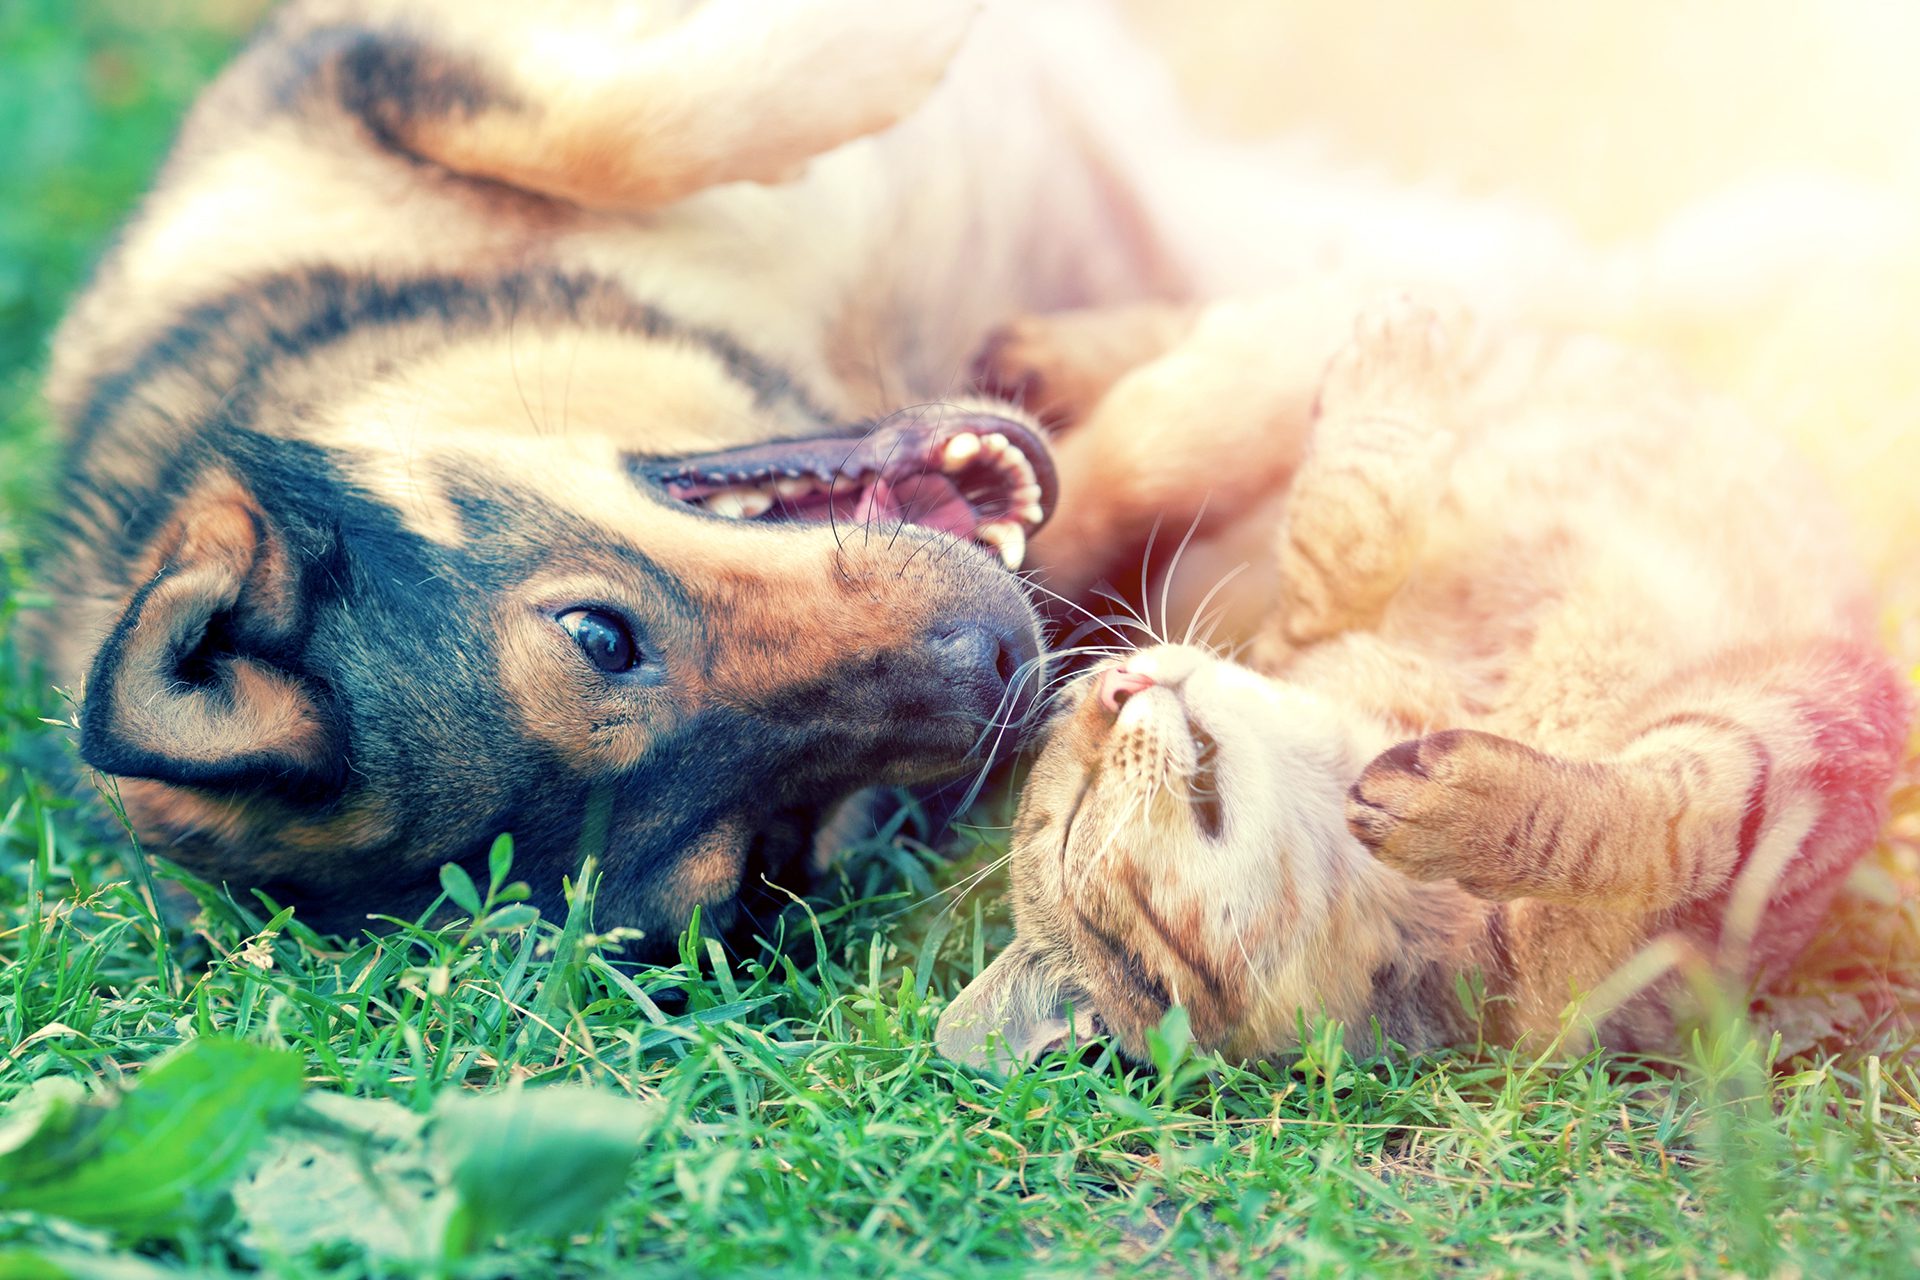 Dog and cat playing with each other in the grass